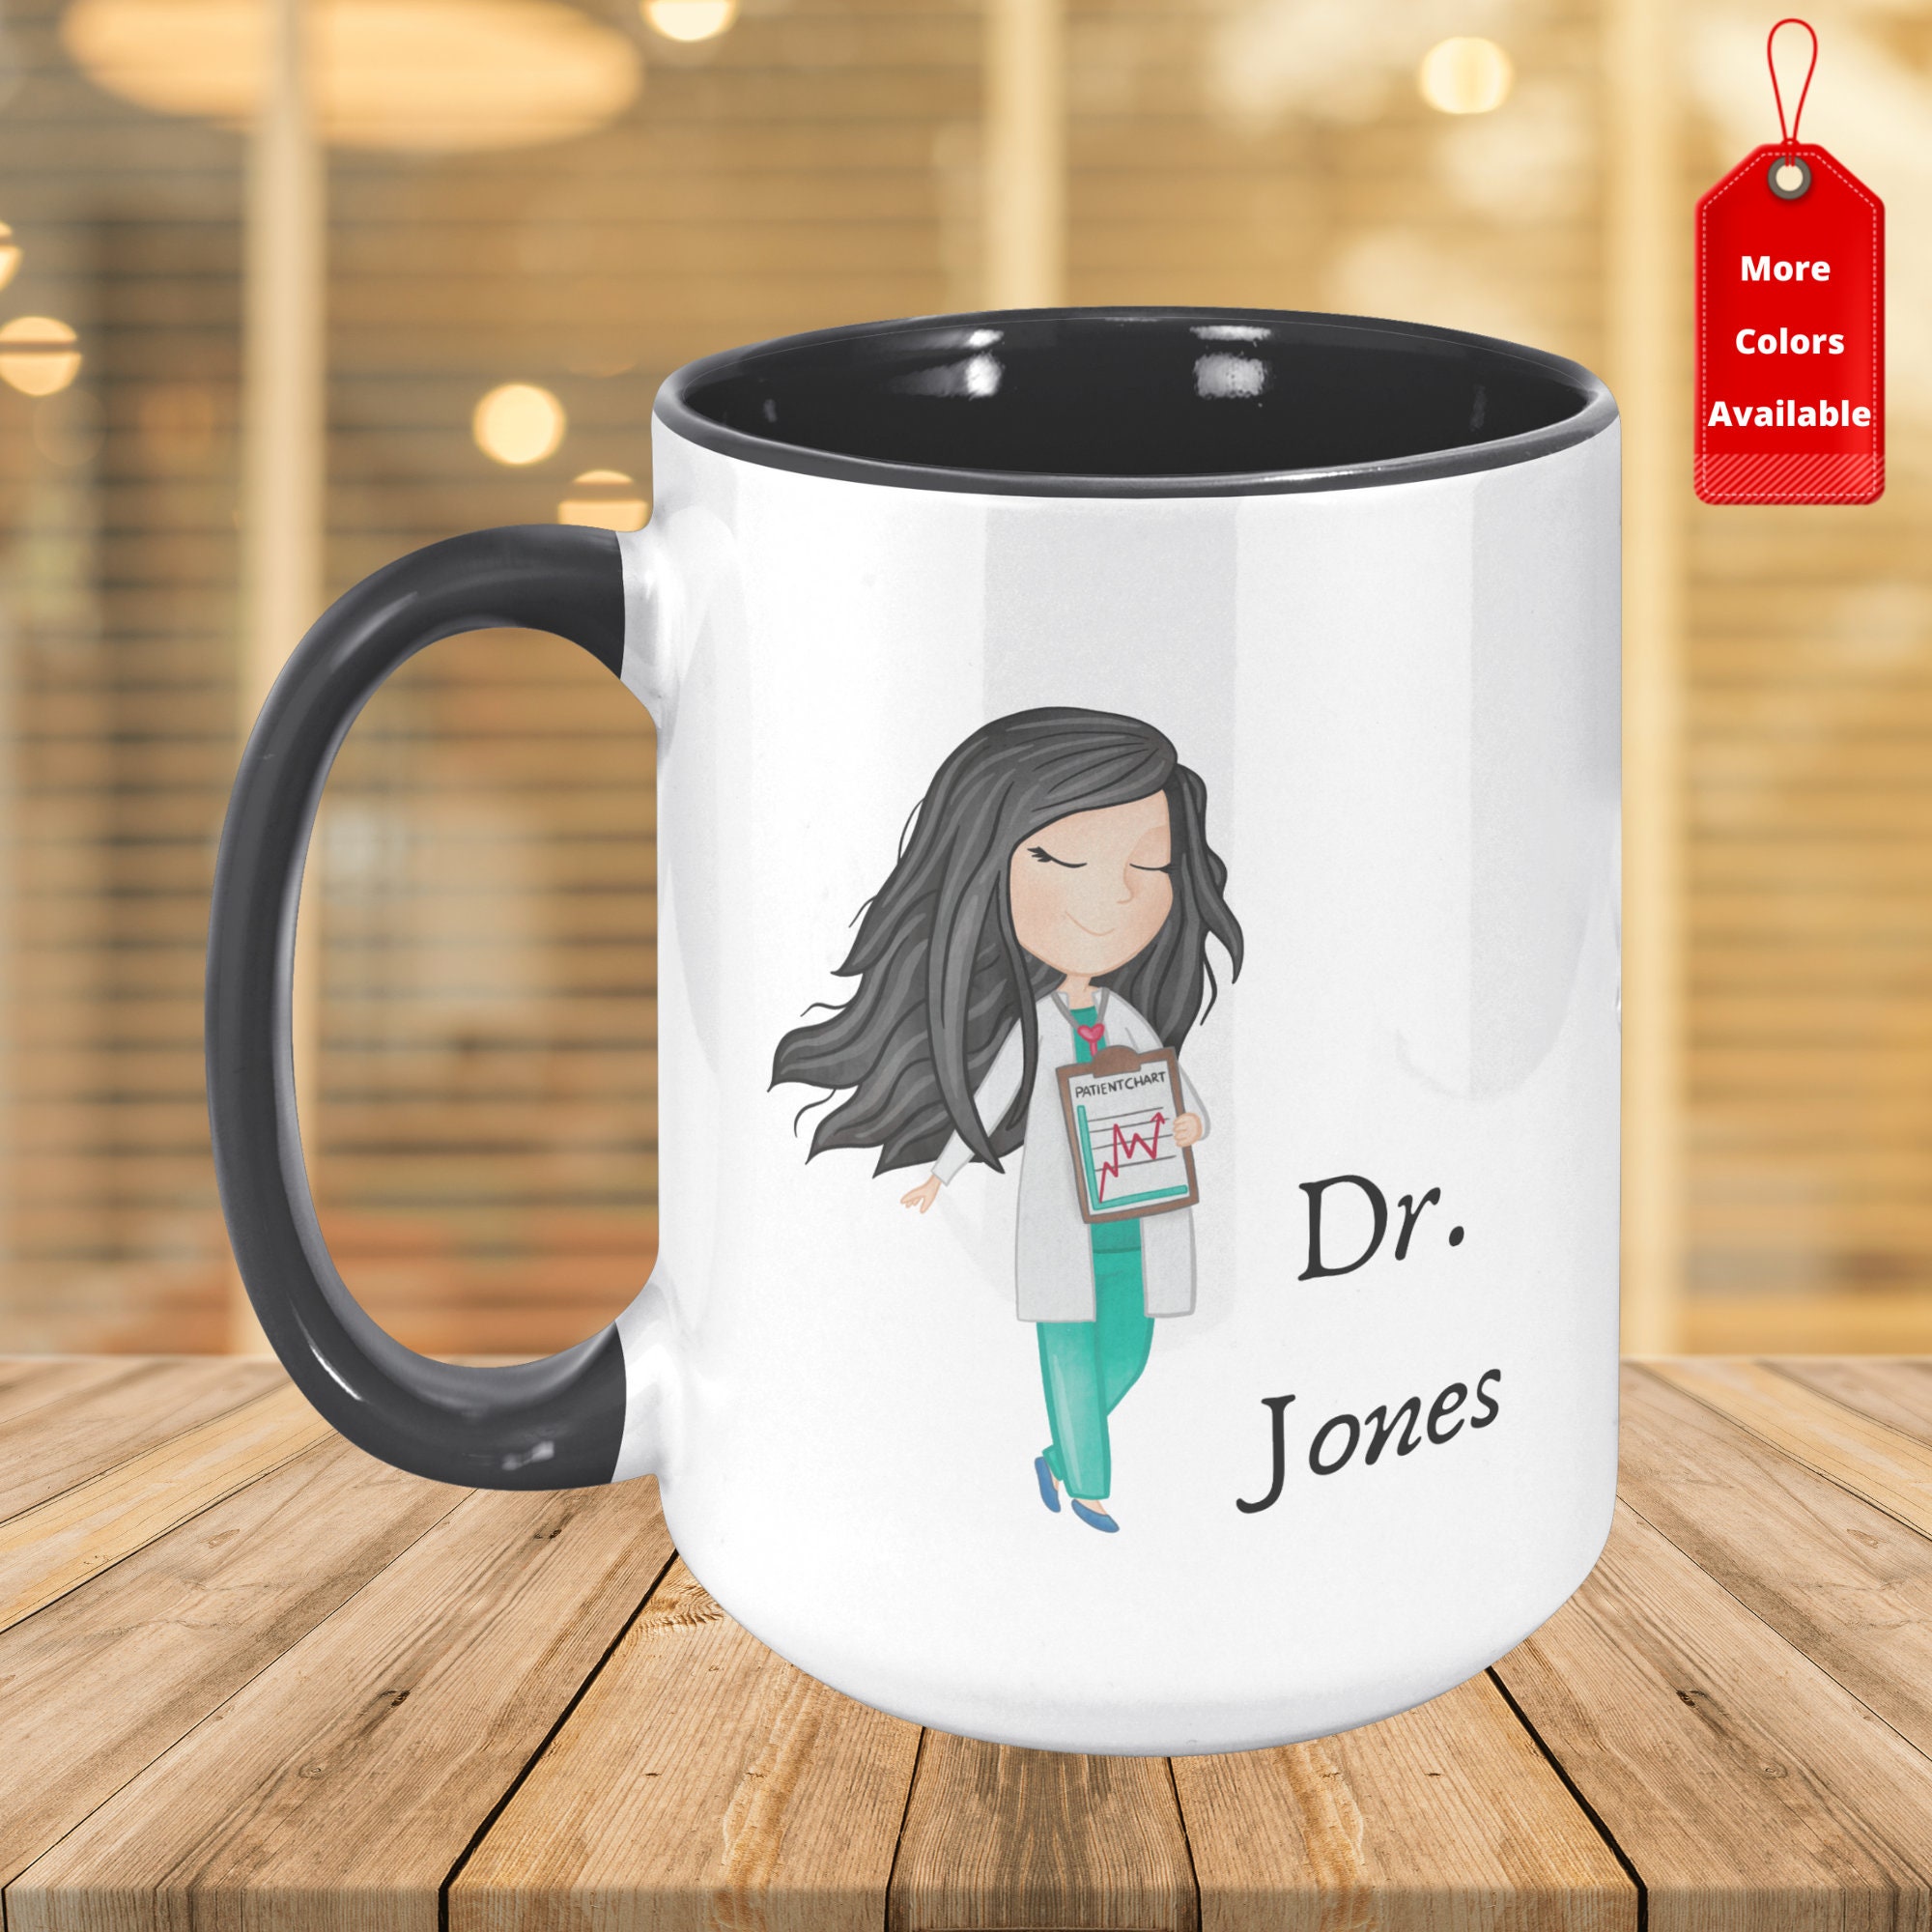 Men Doctor Coffee Mug/Travel 20oz Gifts for Doctors -Google Search Medical Degree Funny Gift Idea for School MD Graduation Assistant Women 